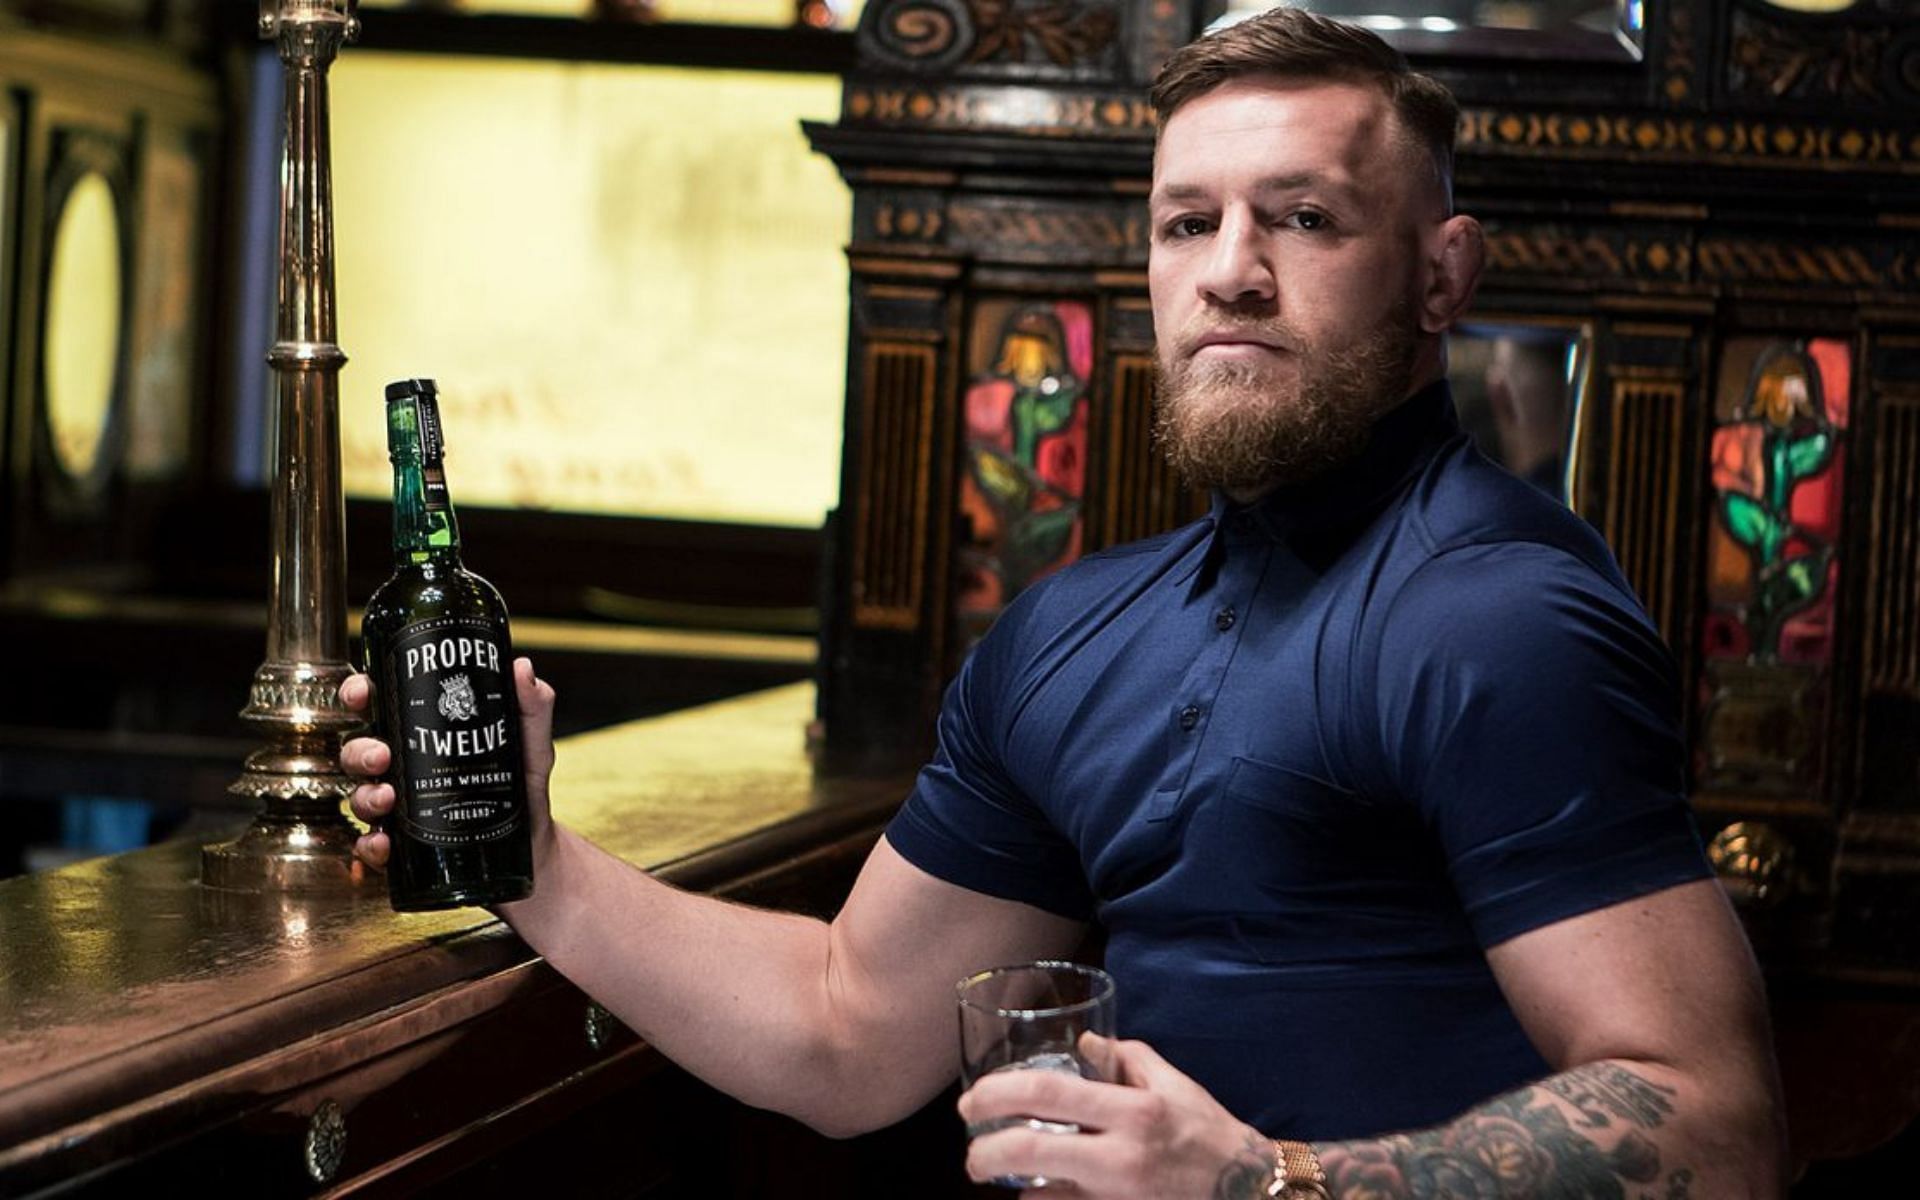 Conor McGregor with a bottle of Proper No. 12 [Image courtesy: @TheMacLife on Twitter]